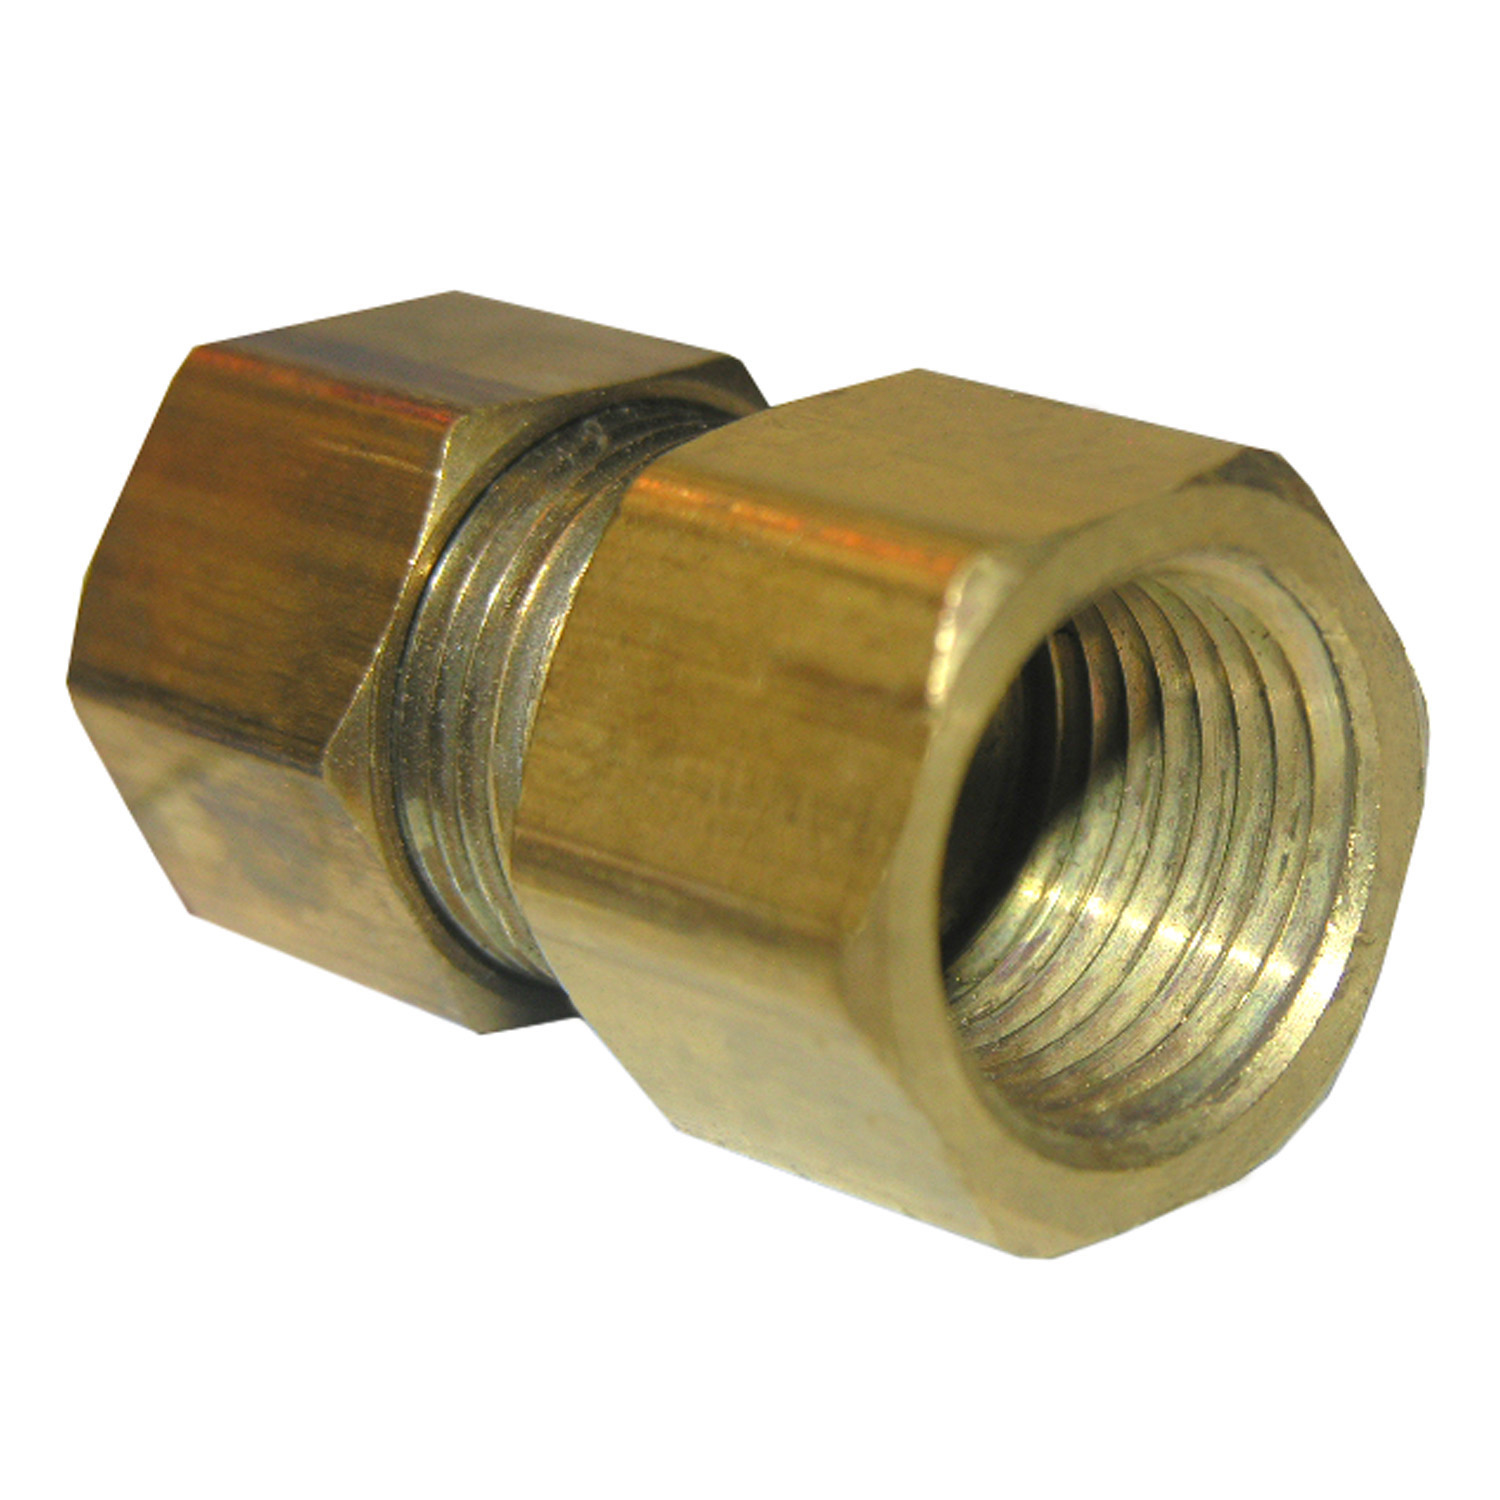 17-6649 Pipe Adapter, 1/2 x 3/8 in, Compression x FPT, Brass, 200 psi Pressure